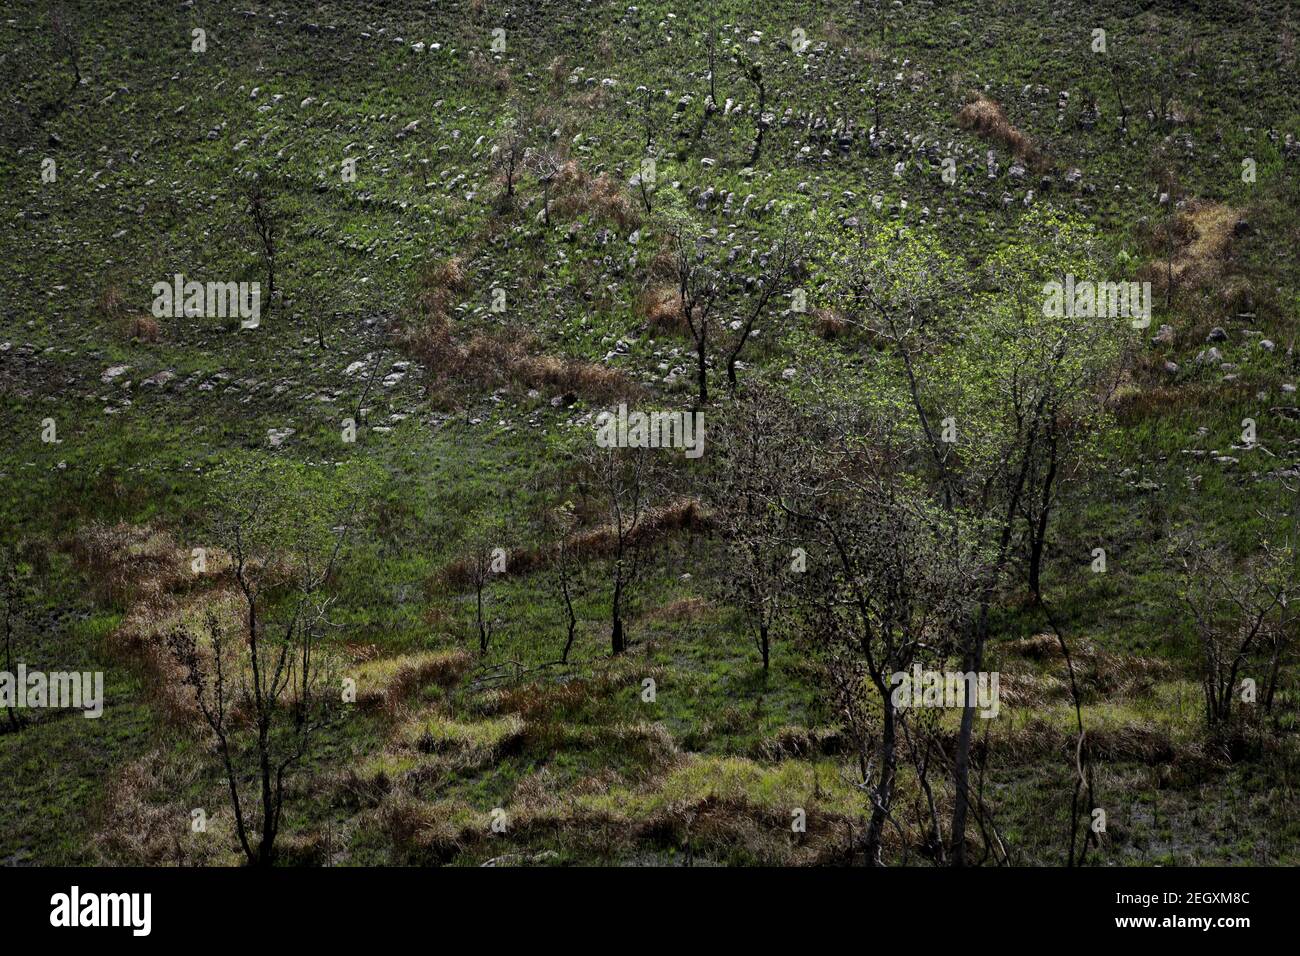 Dry trees during dry season in Sumba, an island in eastern Indonesia where drought hits regularly. Stock Photo